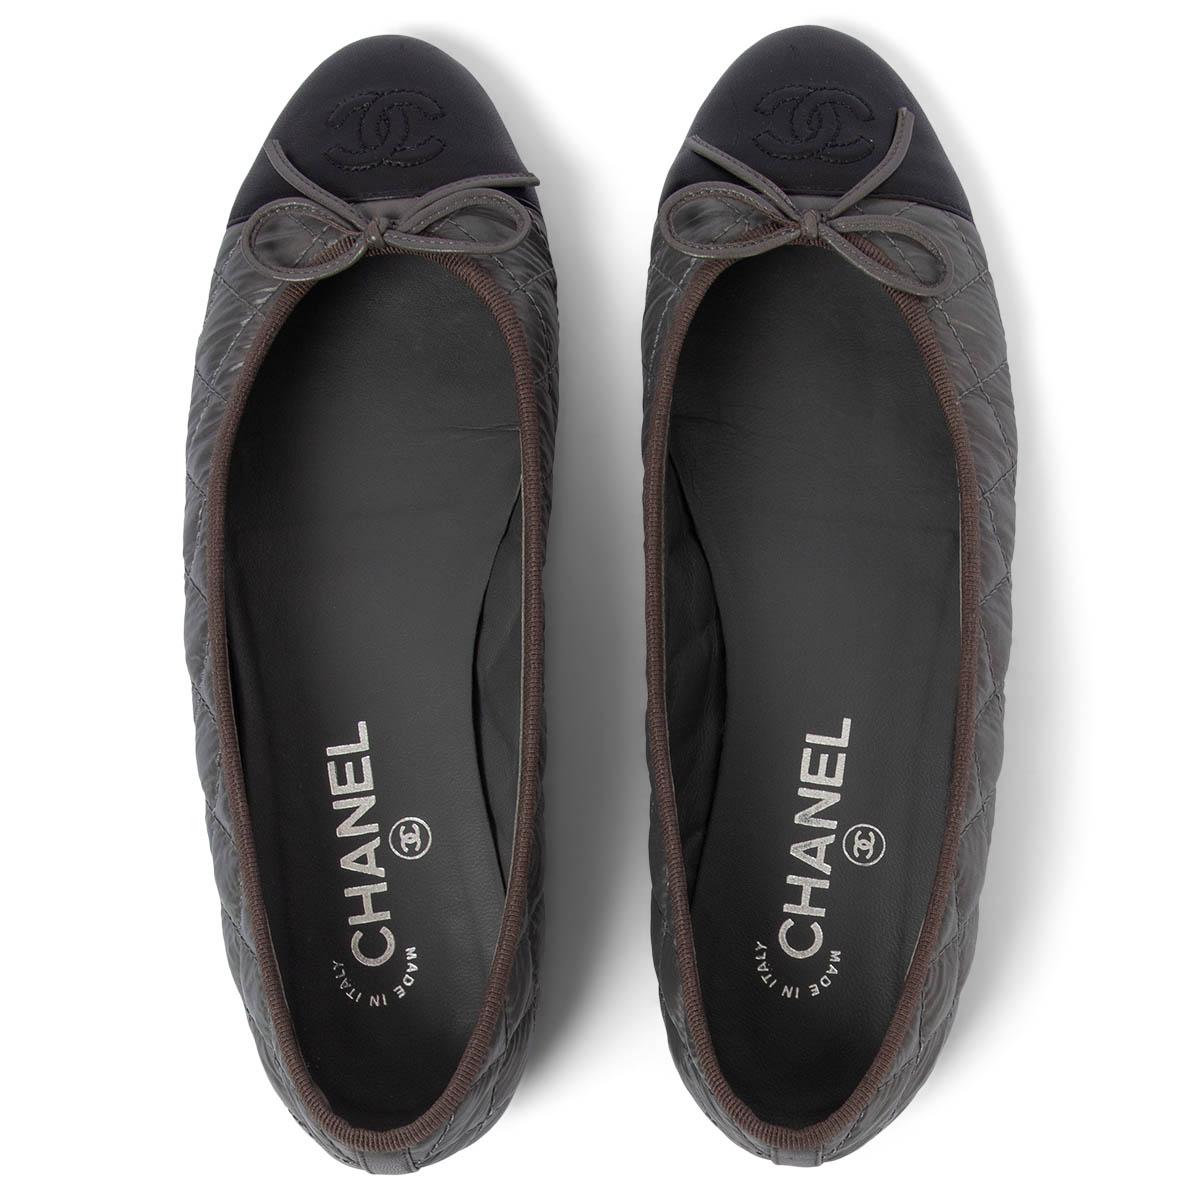 CHANEL grey QUILTED nylon 2011 11A Ballet Flats Shoes 38.5 2